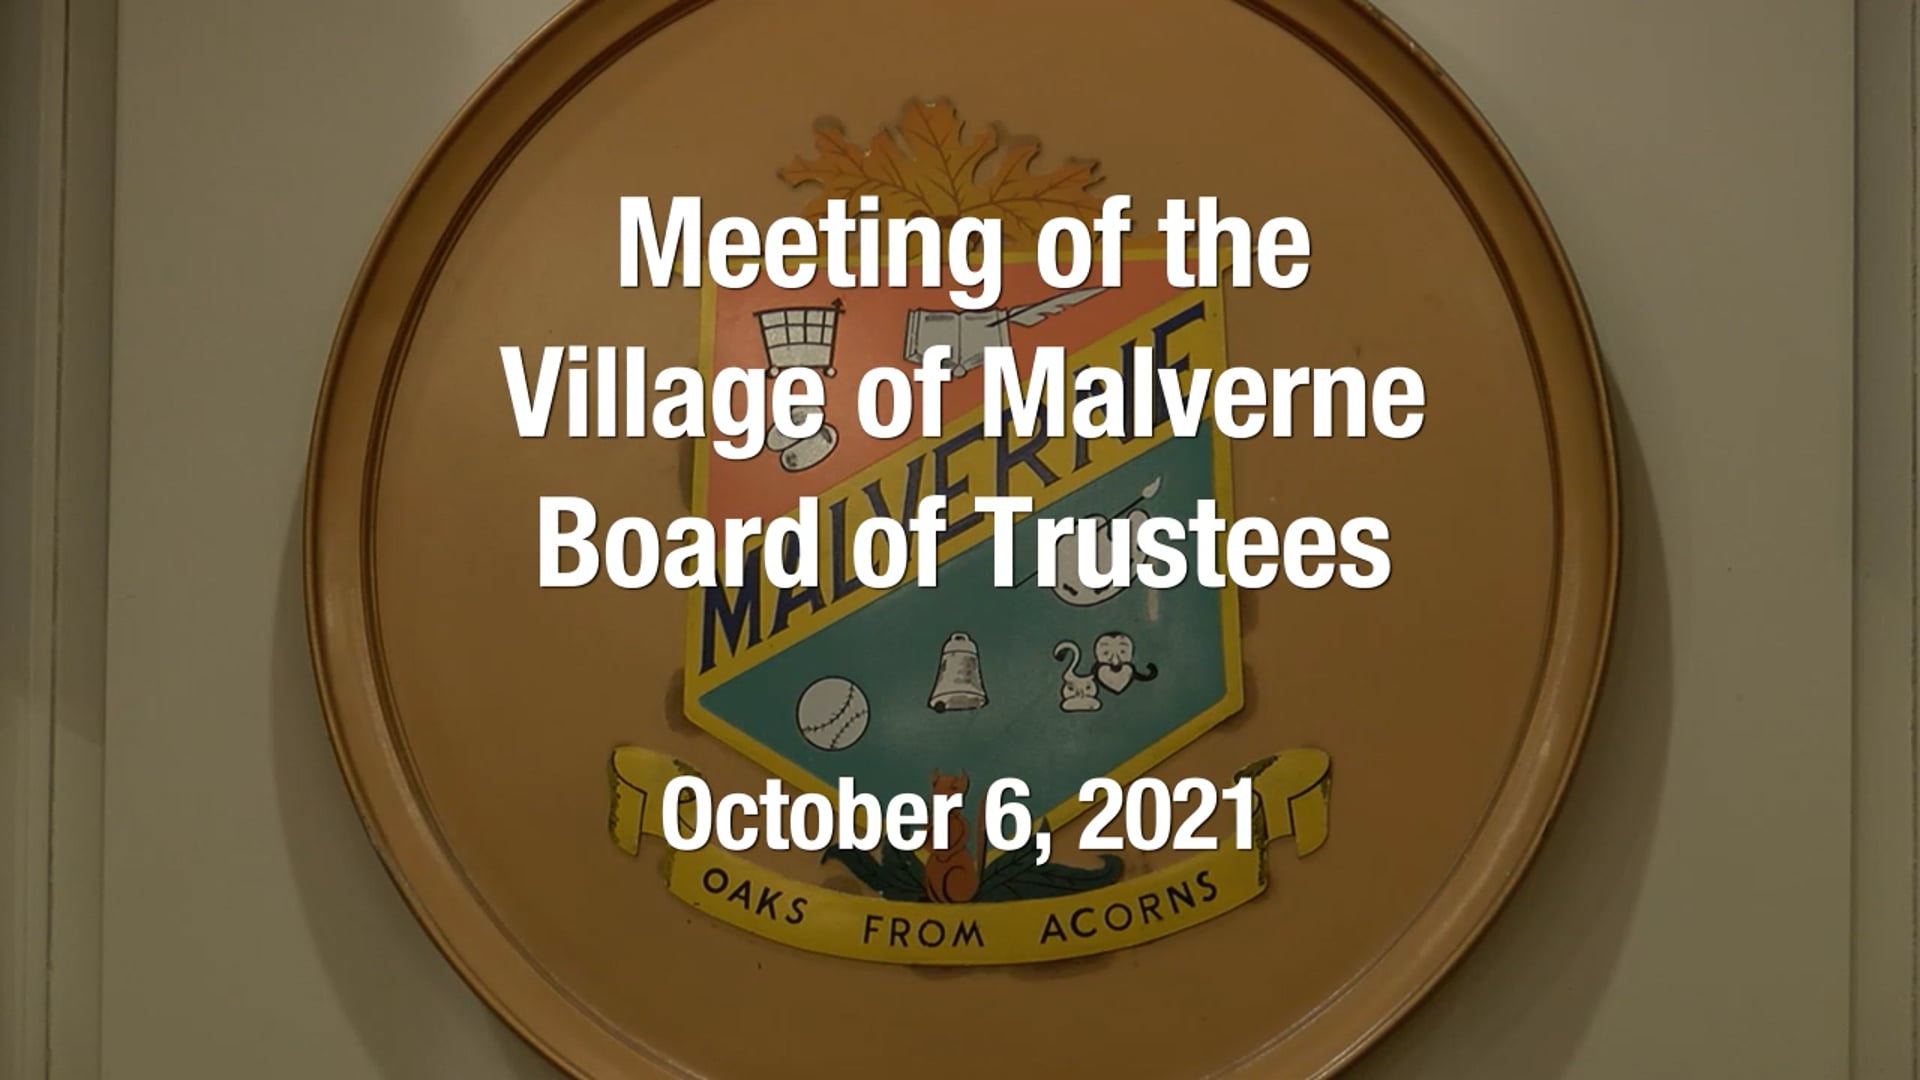 Village of Malverne - Meeting of the Board of Trustees -  October 6, 2021